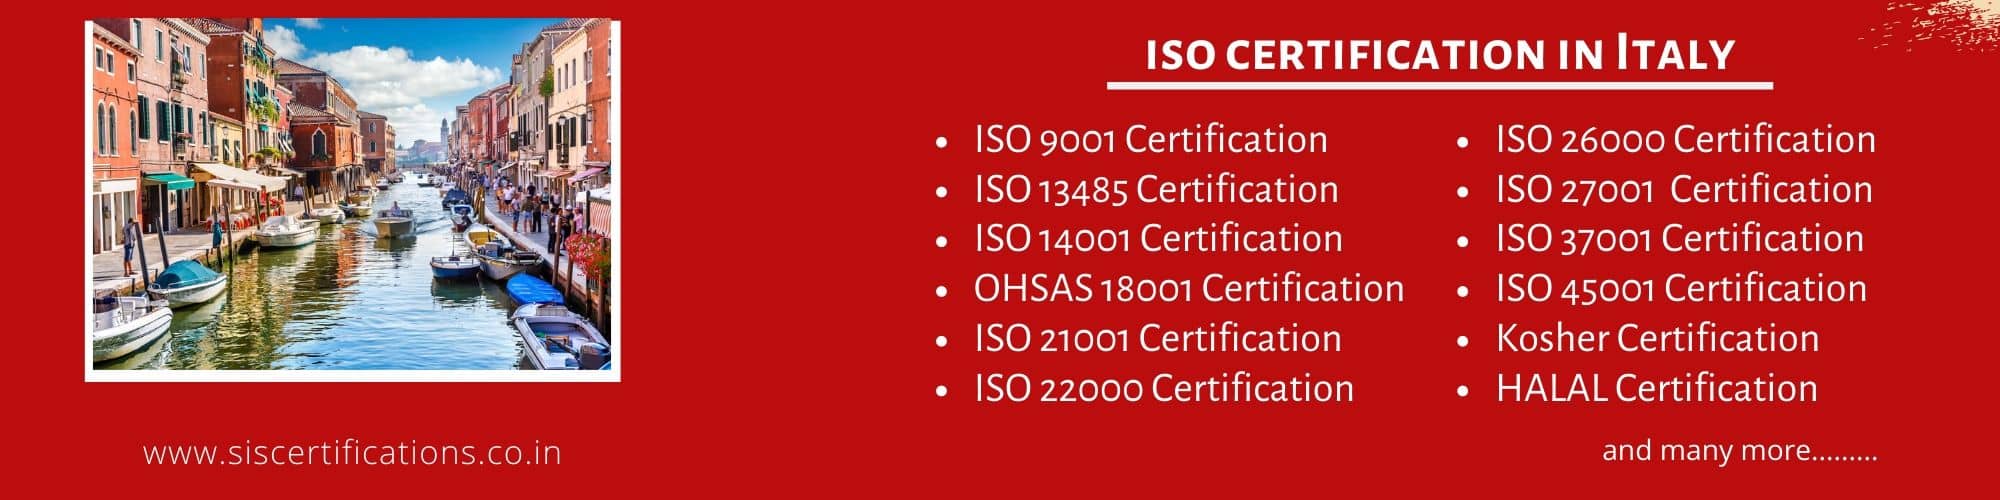 ISO Certification in Italy